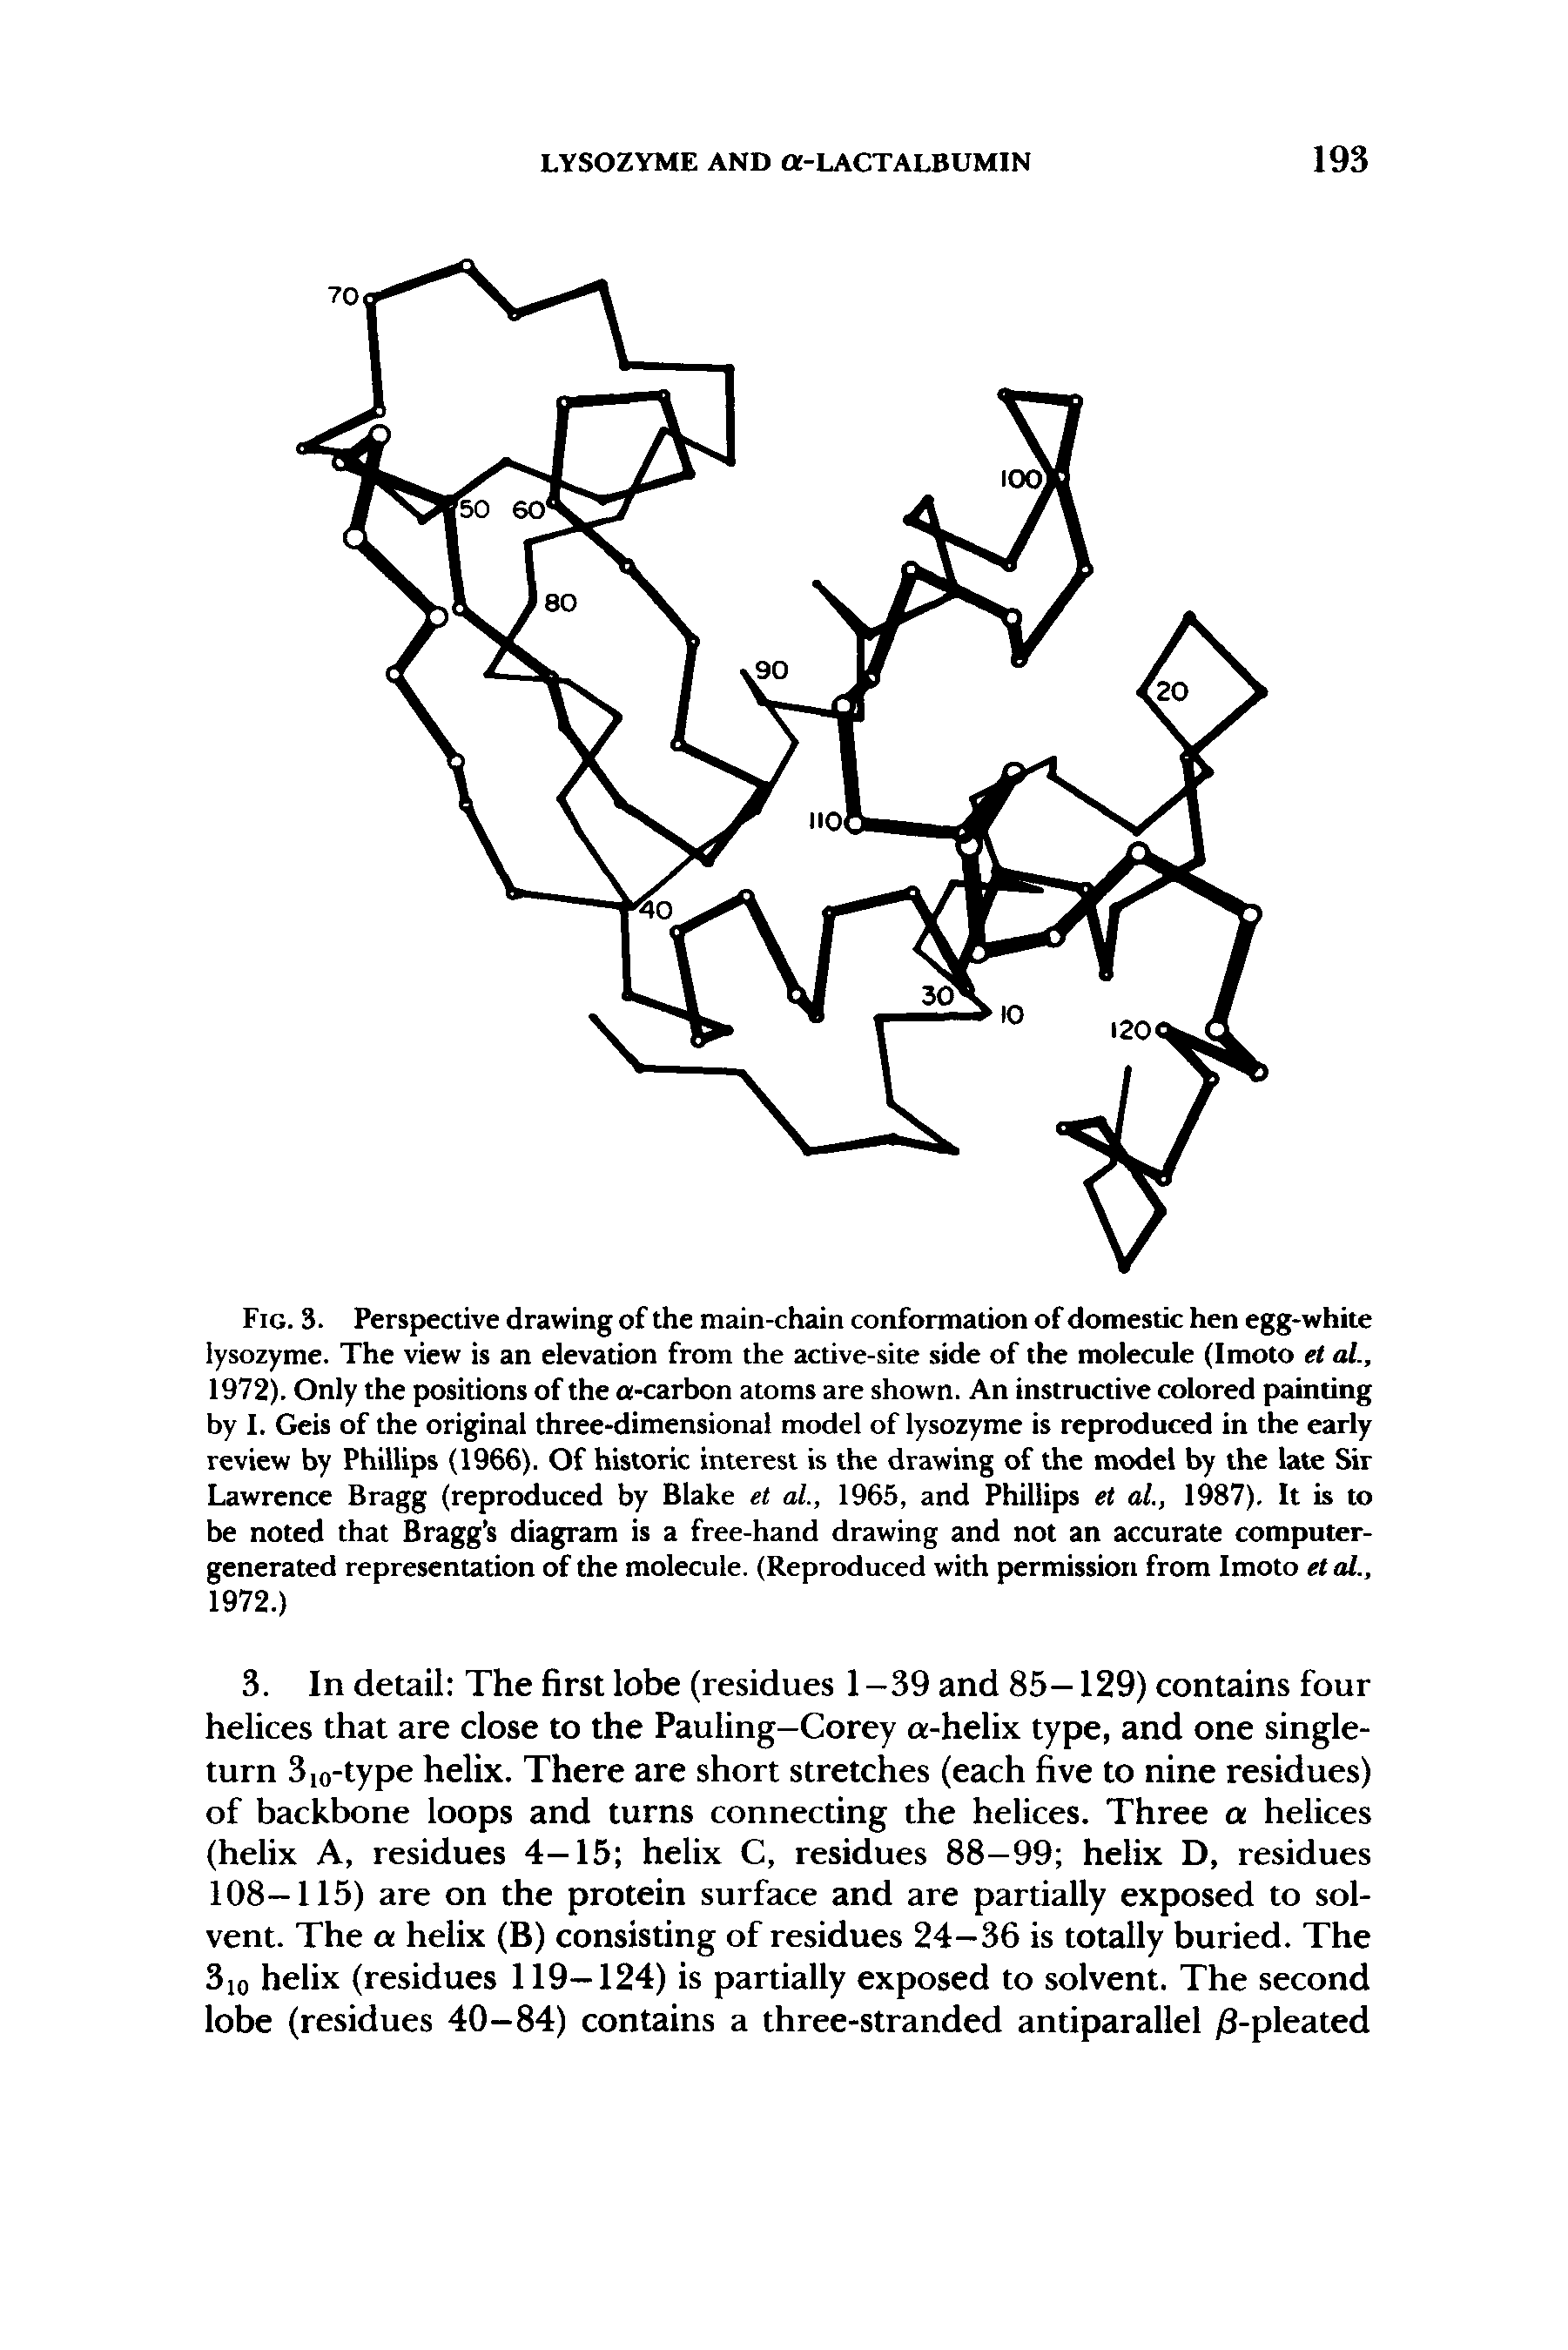 Fig. 3. Perspective drawing of the main-chain conformation of domestic hen egg-white lysozyme. The view is an elevation from the active-site side of the molecule (Imoto et al., 1972). Only the positions of the a-carbon atoms are shown. An instructive colored painting by I. Geis of the original three-dimensional model of lysozyme is reproduced in the early review by Phillips (1966). Of historic interest is the drawing of the model by the late Sir Lawrence Bragg (reproduced by Blake et al., 1965, and Phillips et al., 1987). It is to be noted that Bragg s diagram is a free-hand drawing and not an accurate computer-generated representation of the molecule. (Reproduced with permission from Imoto et al., 1972.)...